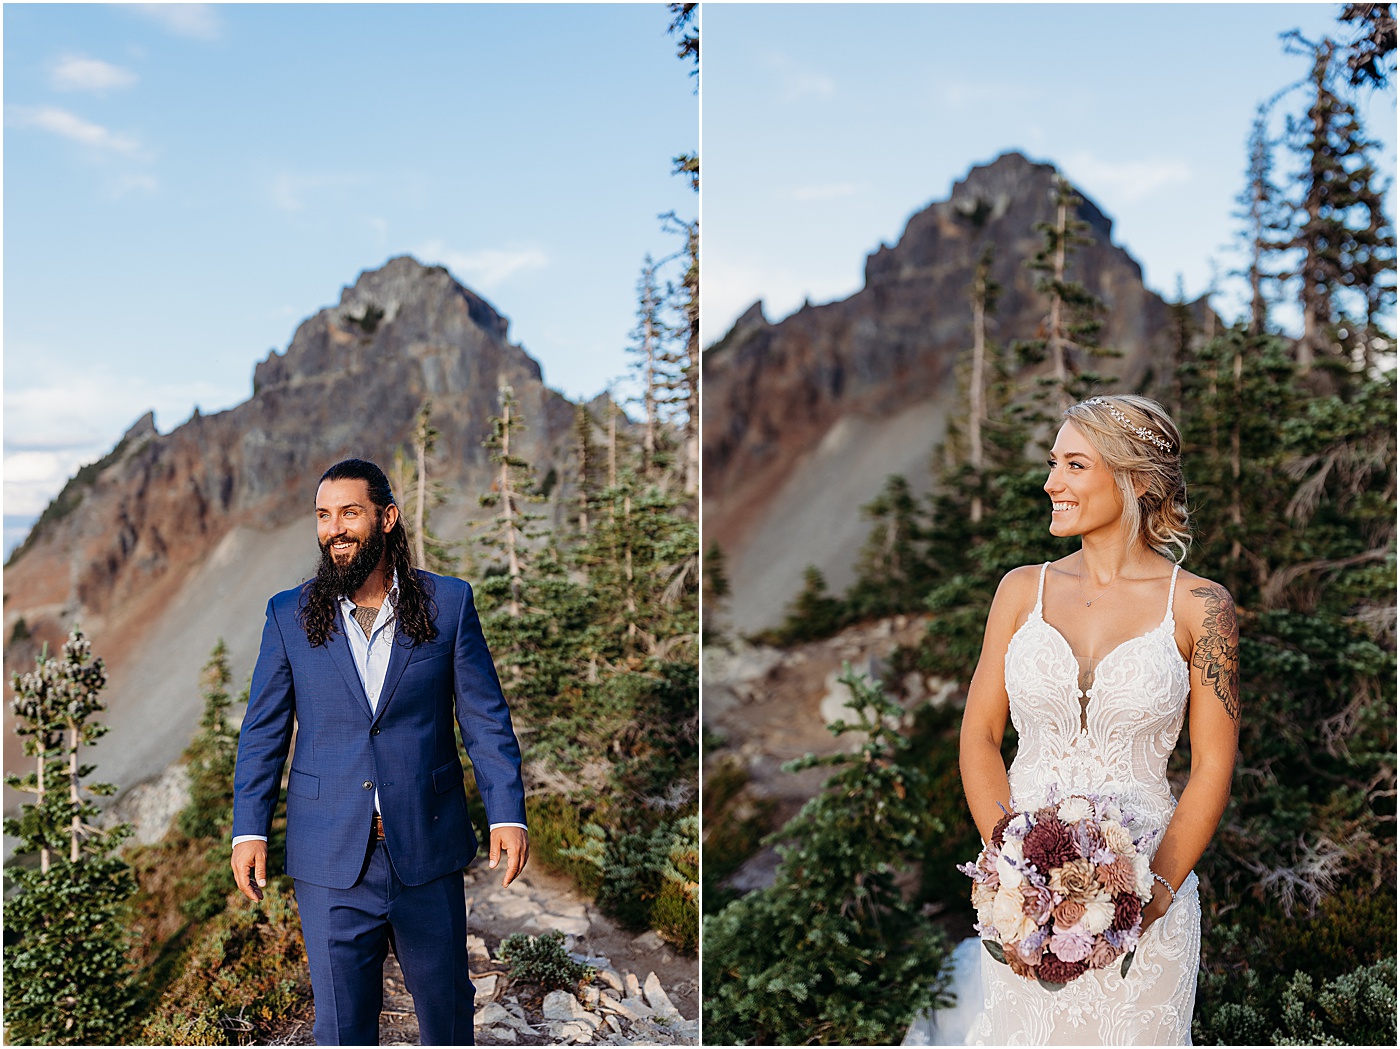 Bride and Groom portraits | Photo by Megan Montalvo Photography